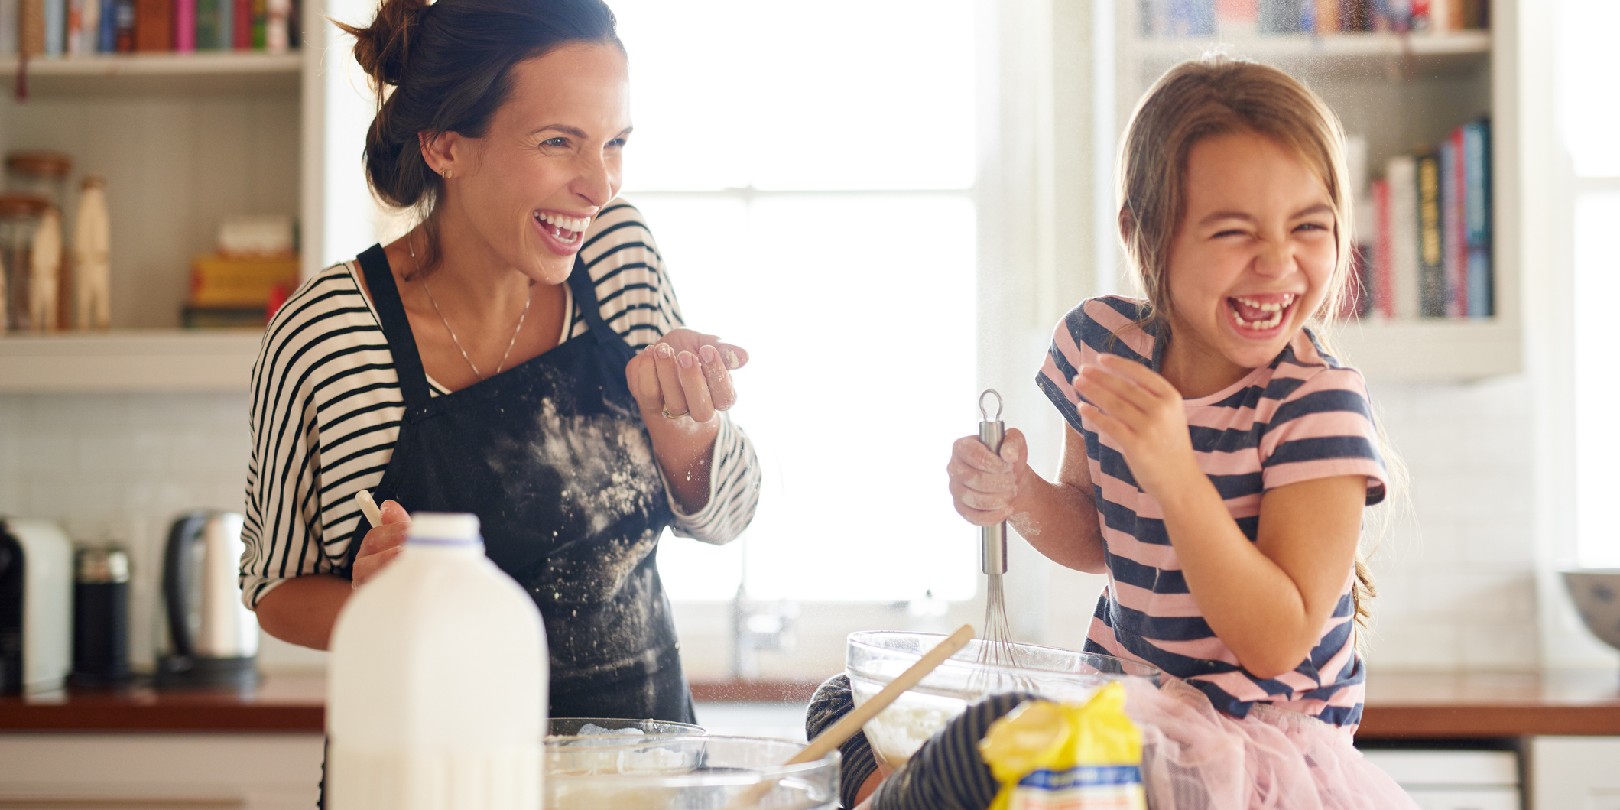 Shot of a little girl having fun baking with her mother in the kitchen